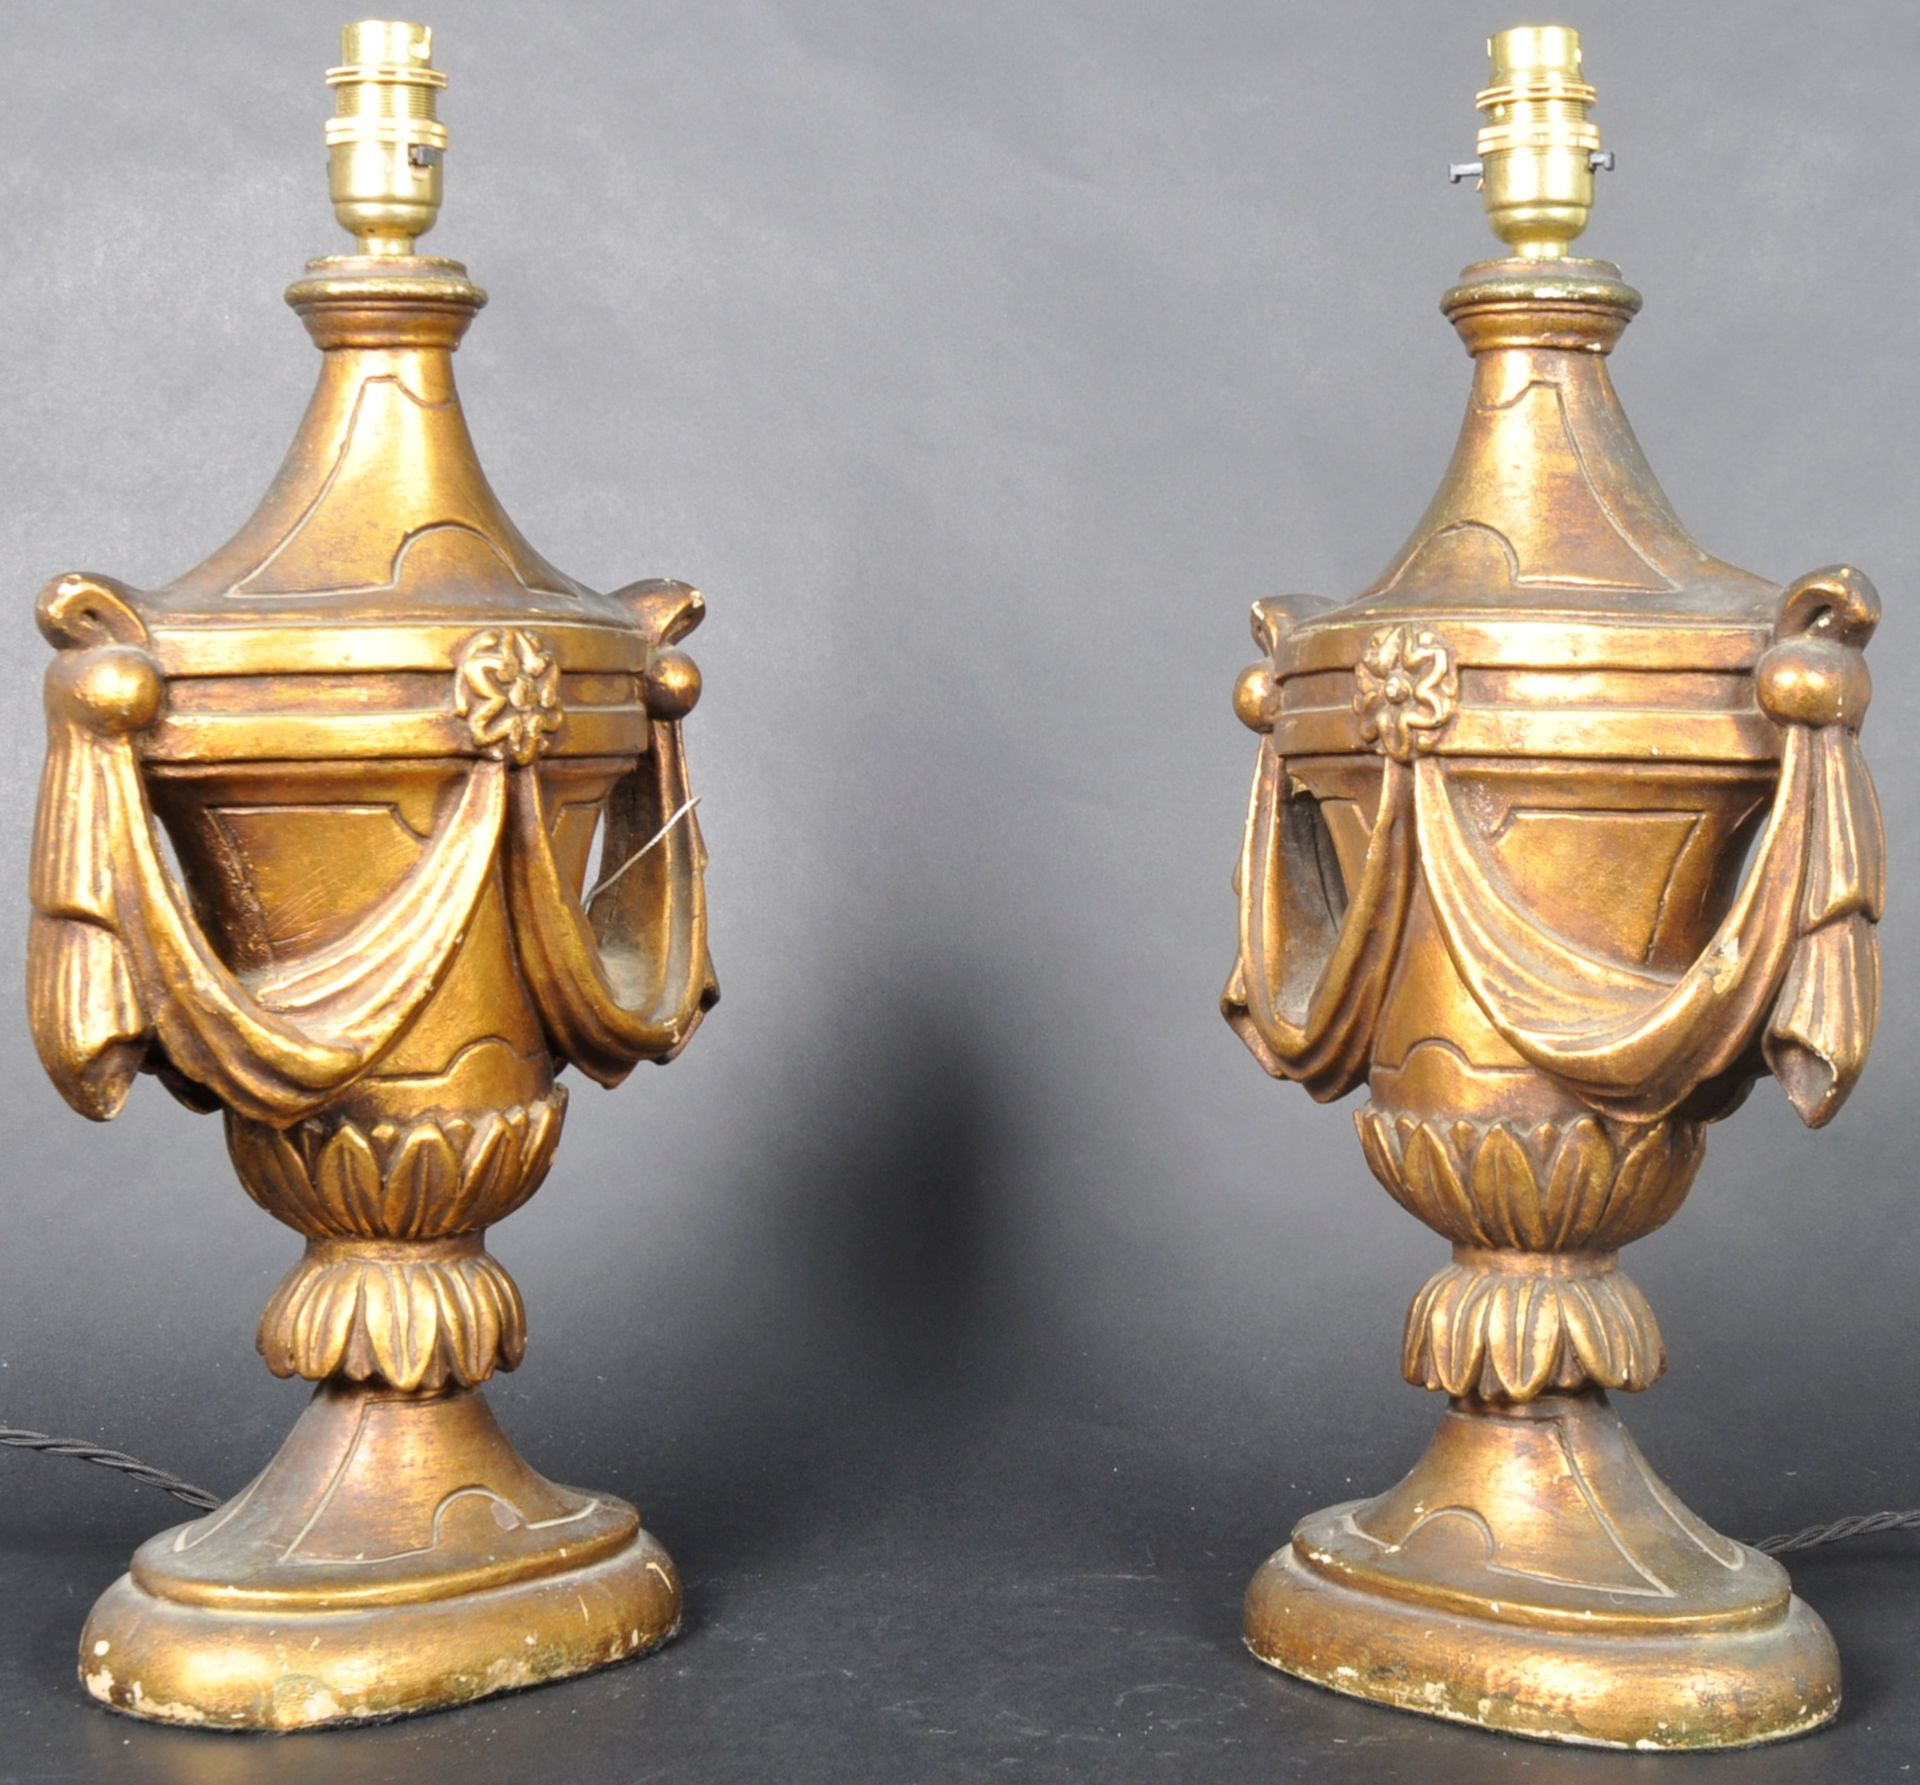 PAIR OF ART DECO GILT RESIN TABLE LAMP LIGHTS OF URN FORM - Image 3 of 9